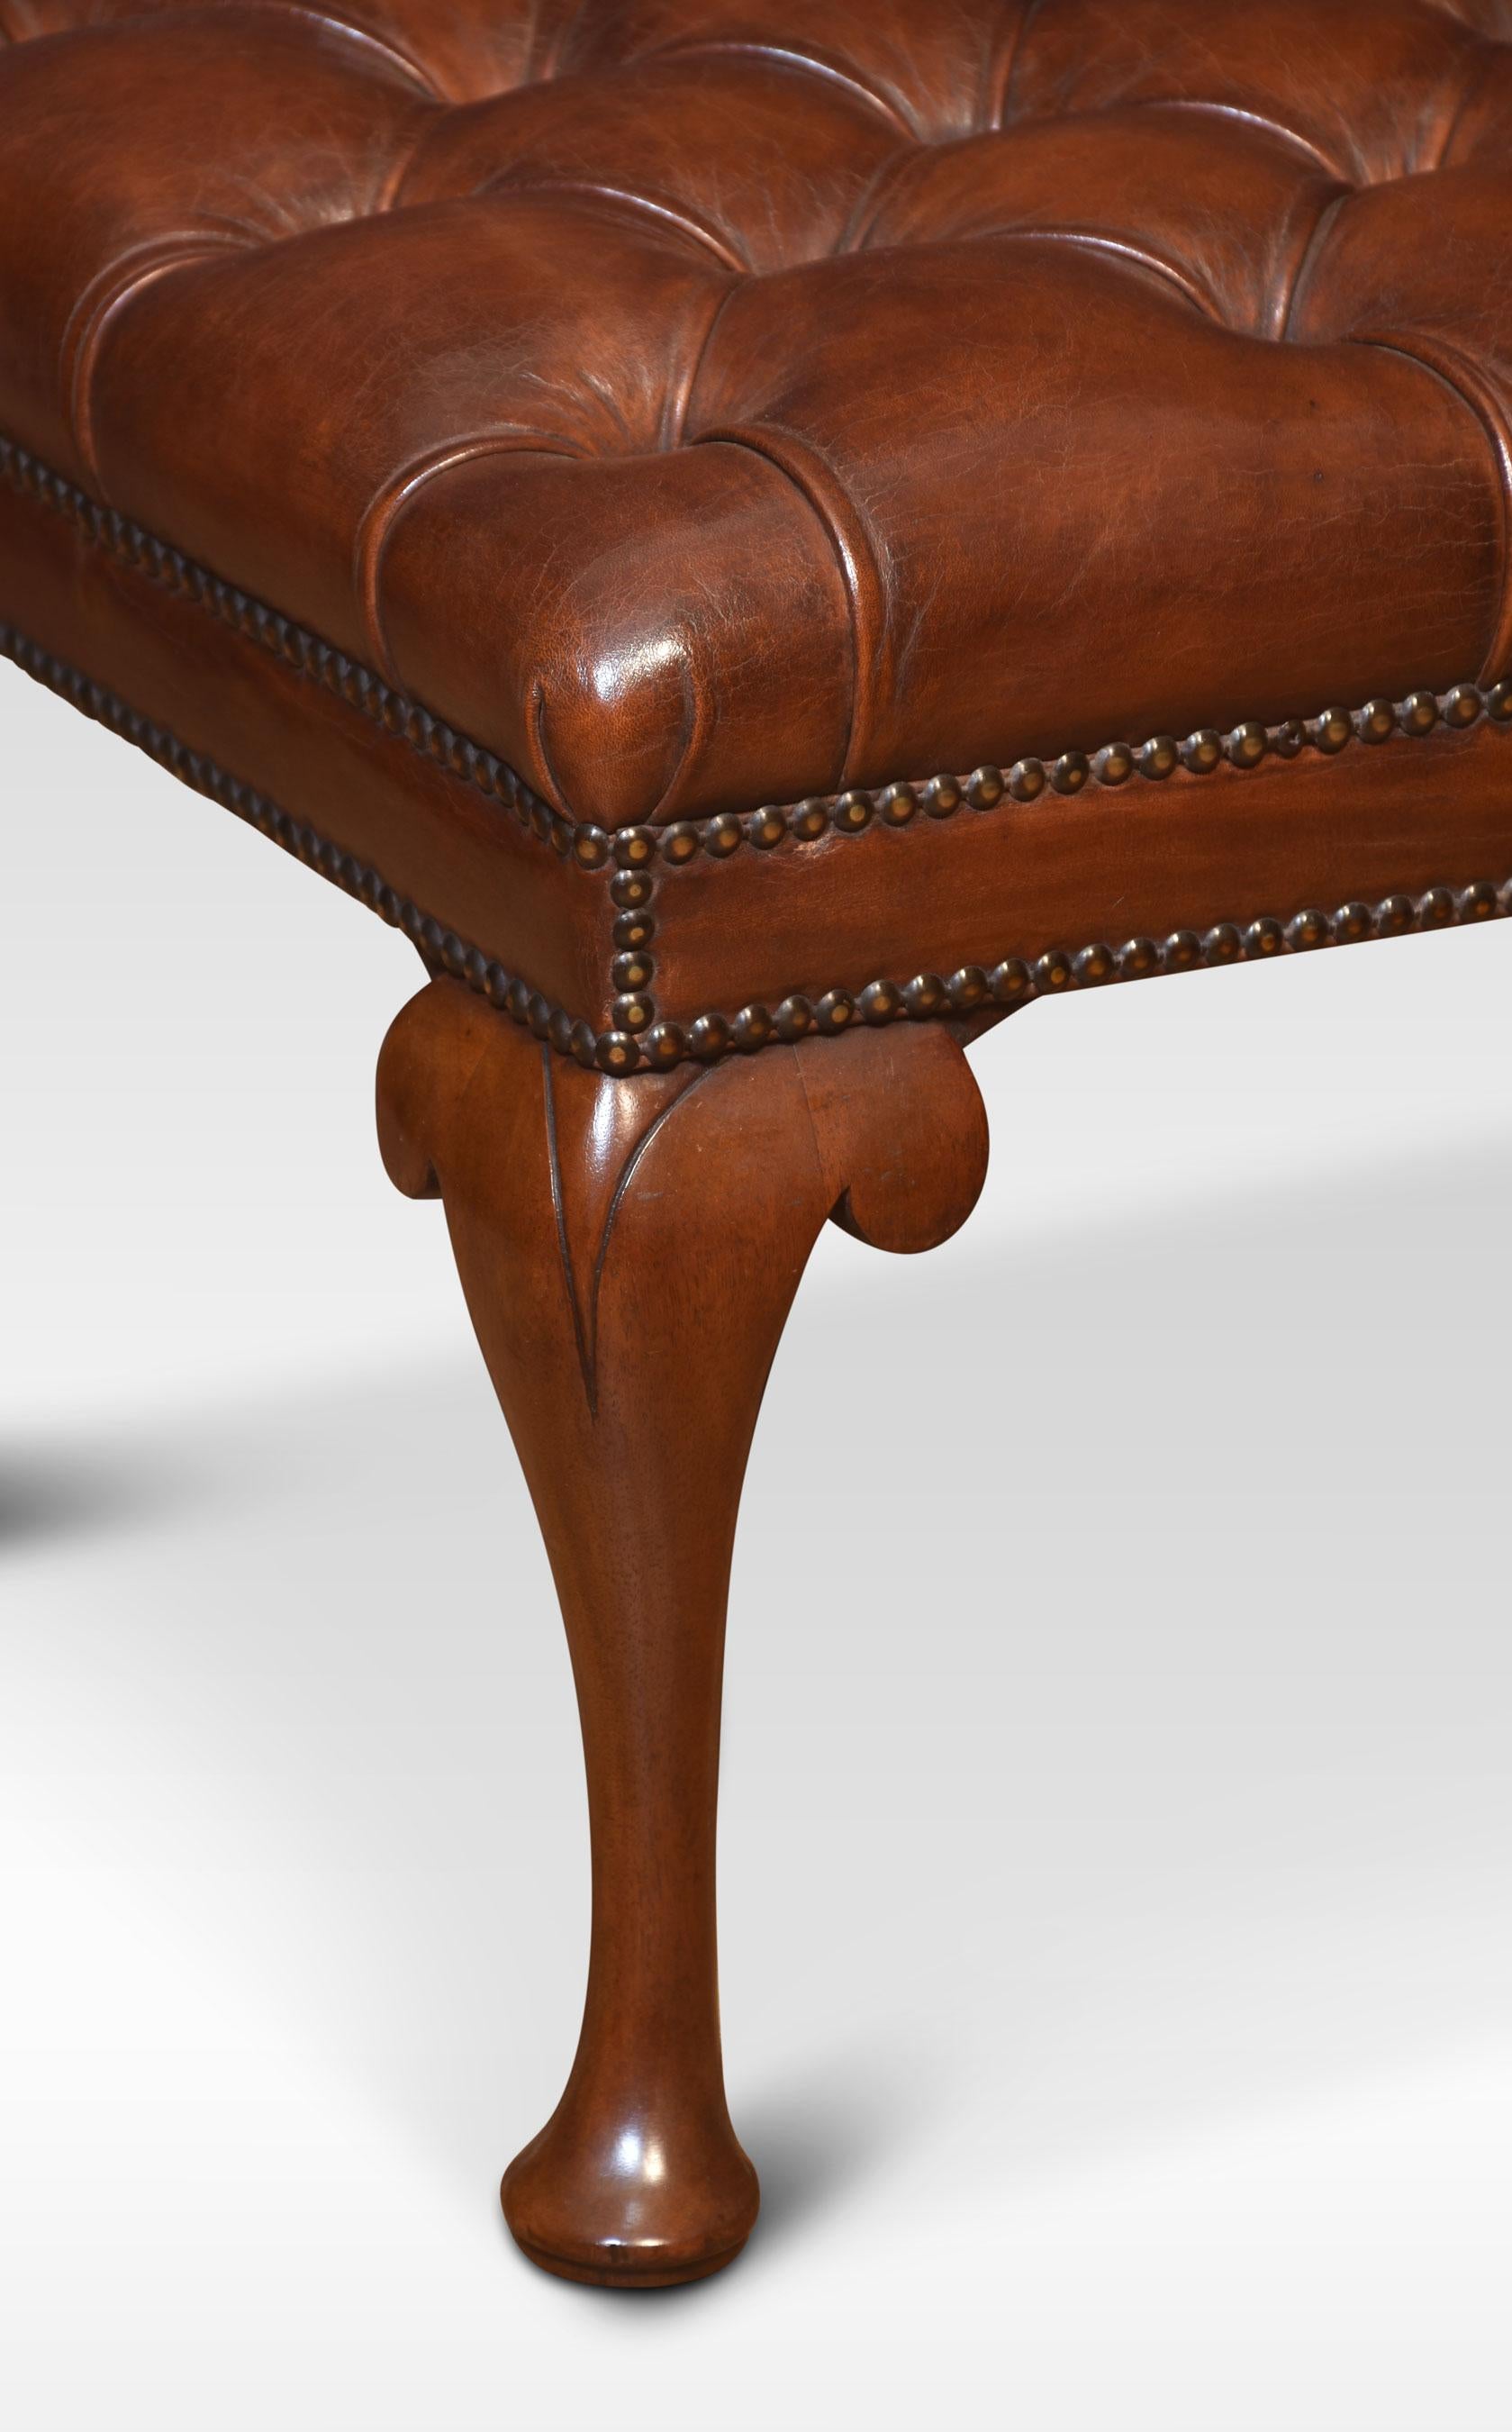 A pair of stools the rectangular upholstered brown leather deep buttoned seats raised up on four cabriole legs. The leather has been replaced and hand-dyed.
Dimensions
Height 16.5 Inches
Width 23.5 Inches
Depth 20.5 Inches